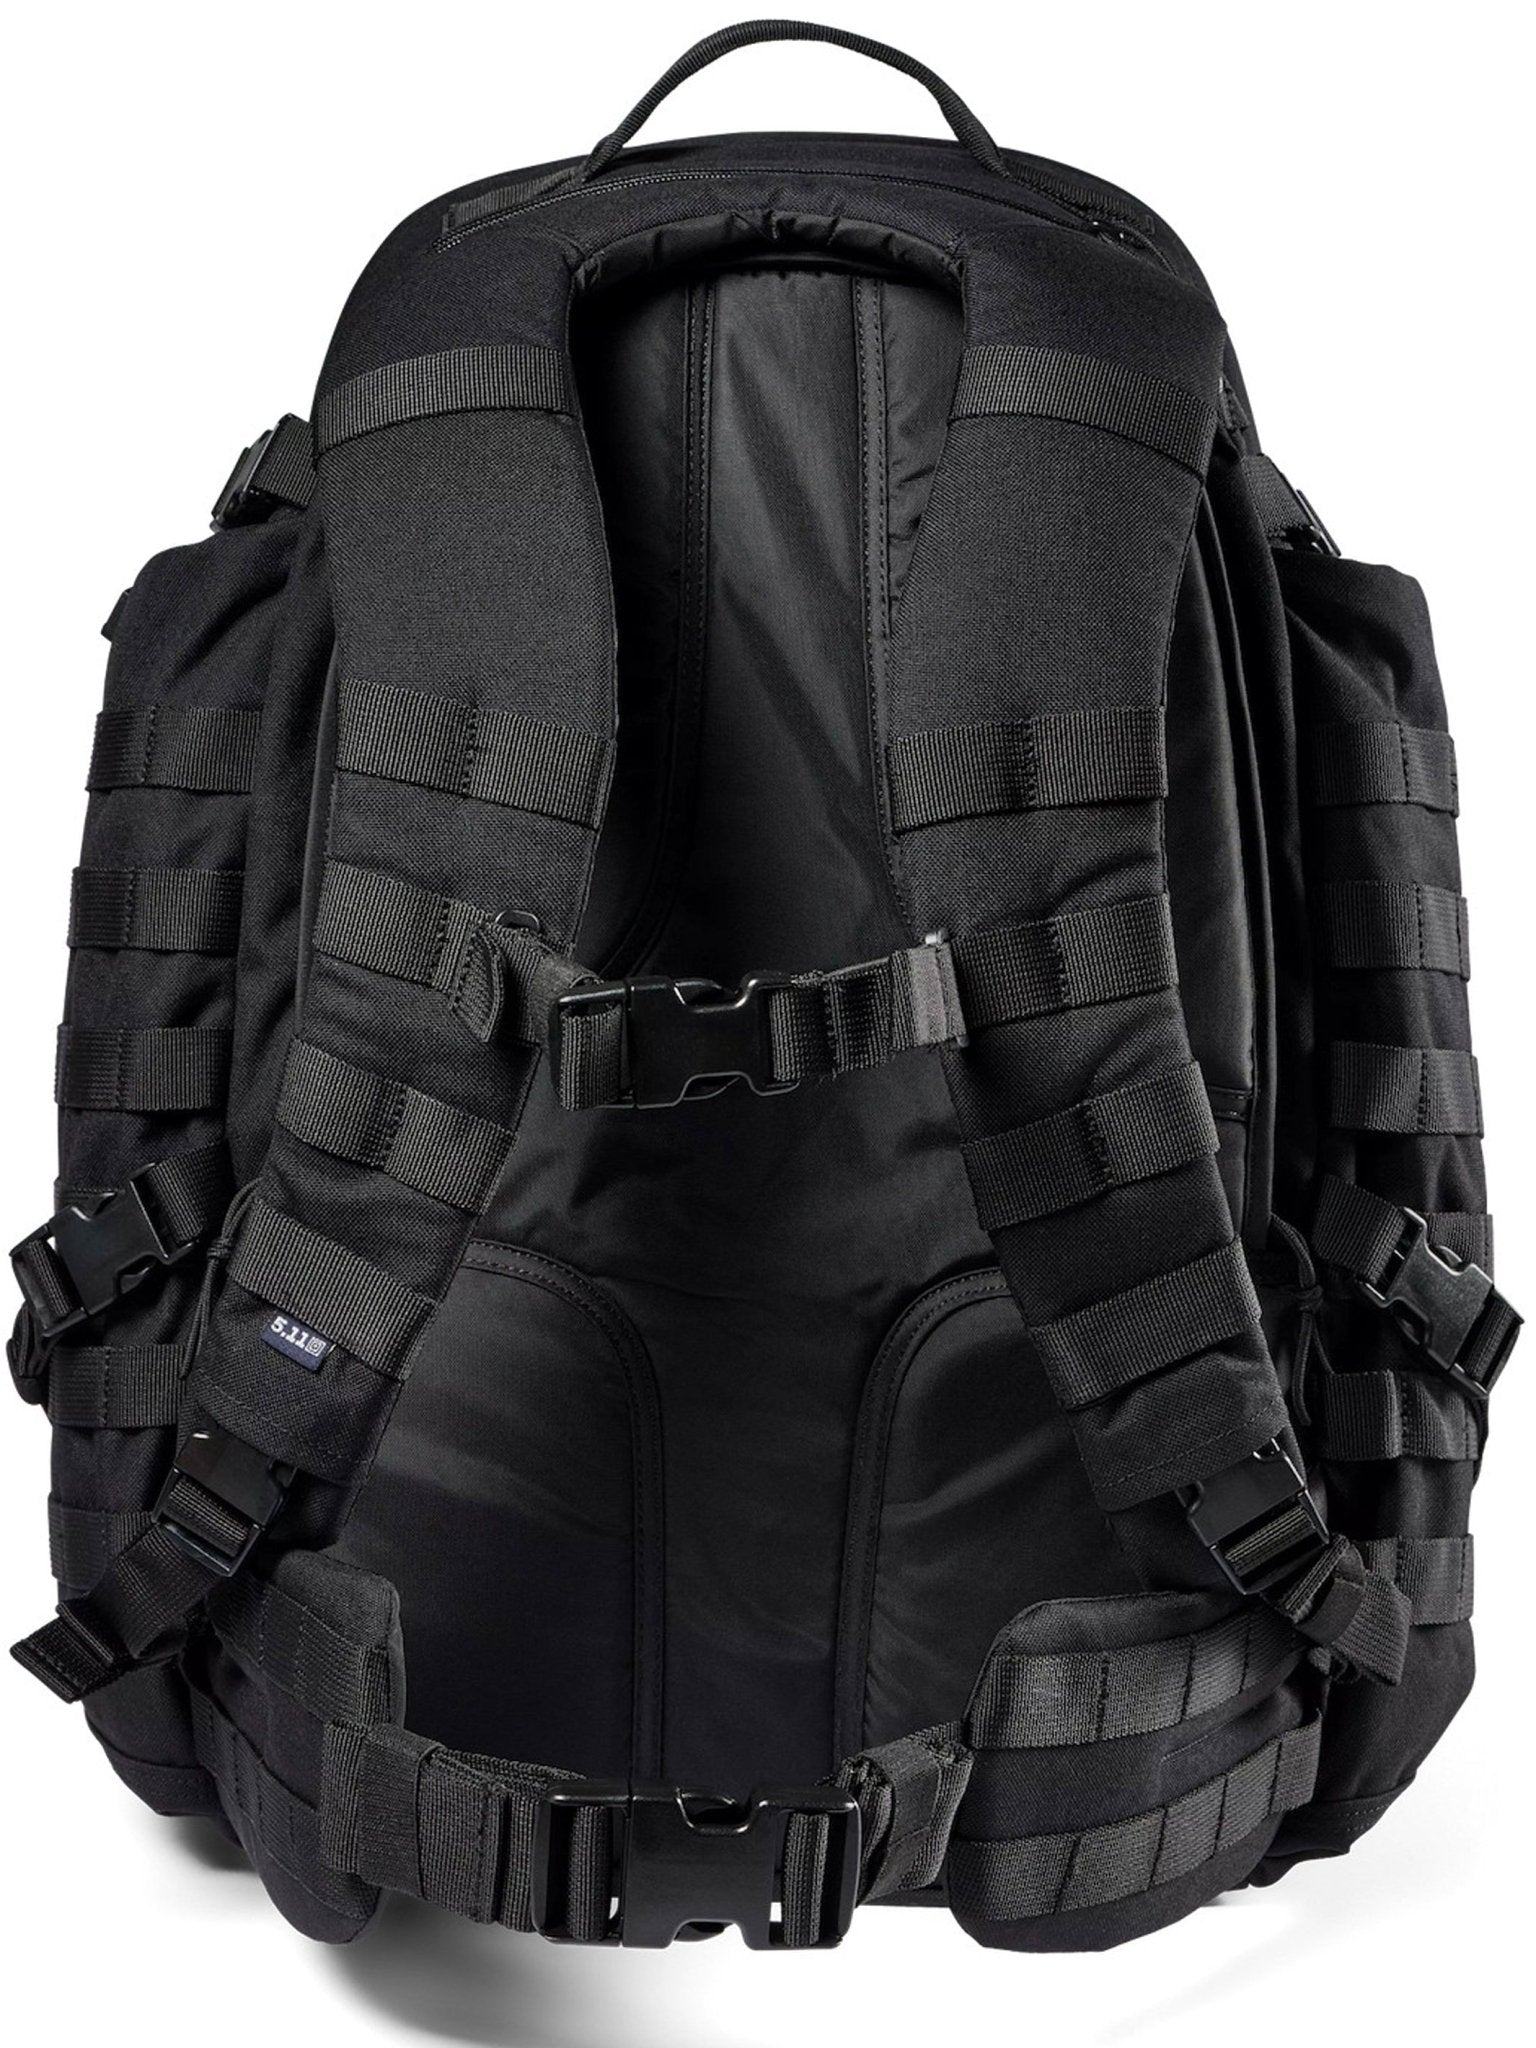 4elementsclothing5.11 Tactical5.11 Tactical - 5.11 Tactical Rush 72 2.0 Backpack - Style 56565Bag56565-019